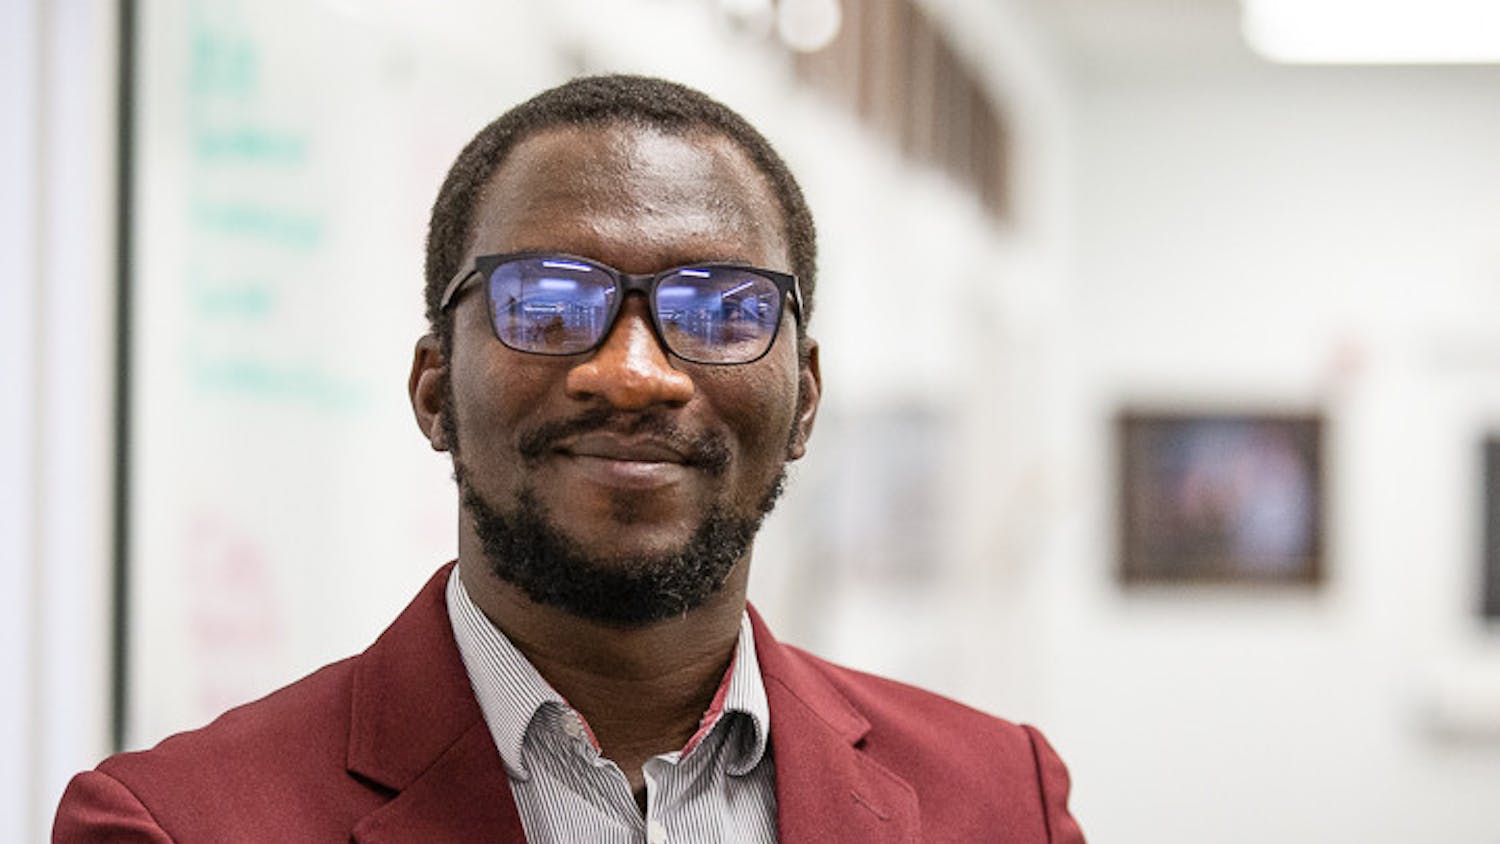 Fourth-year Ph.D. student Maxwell Akonde poses in front of the Leadership and Service center located inside Russell House on October 6, 2022. Akonde is the president of the Graduate Student Association at the University of South Carolina.